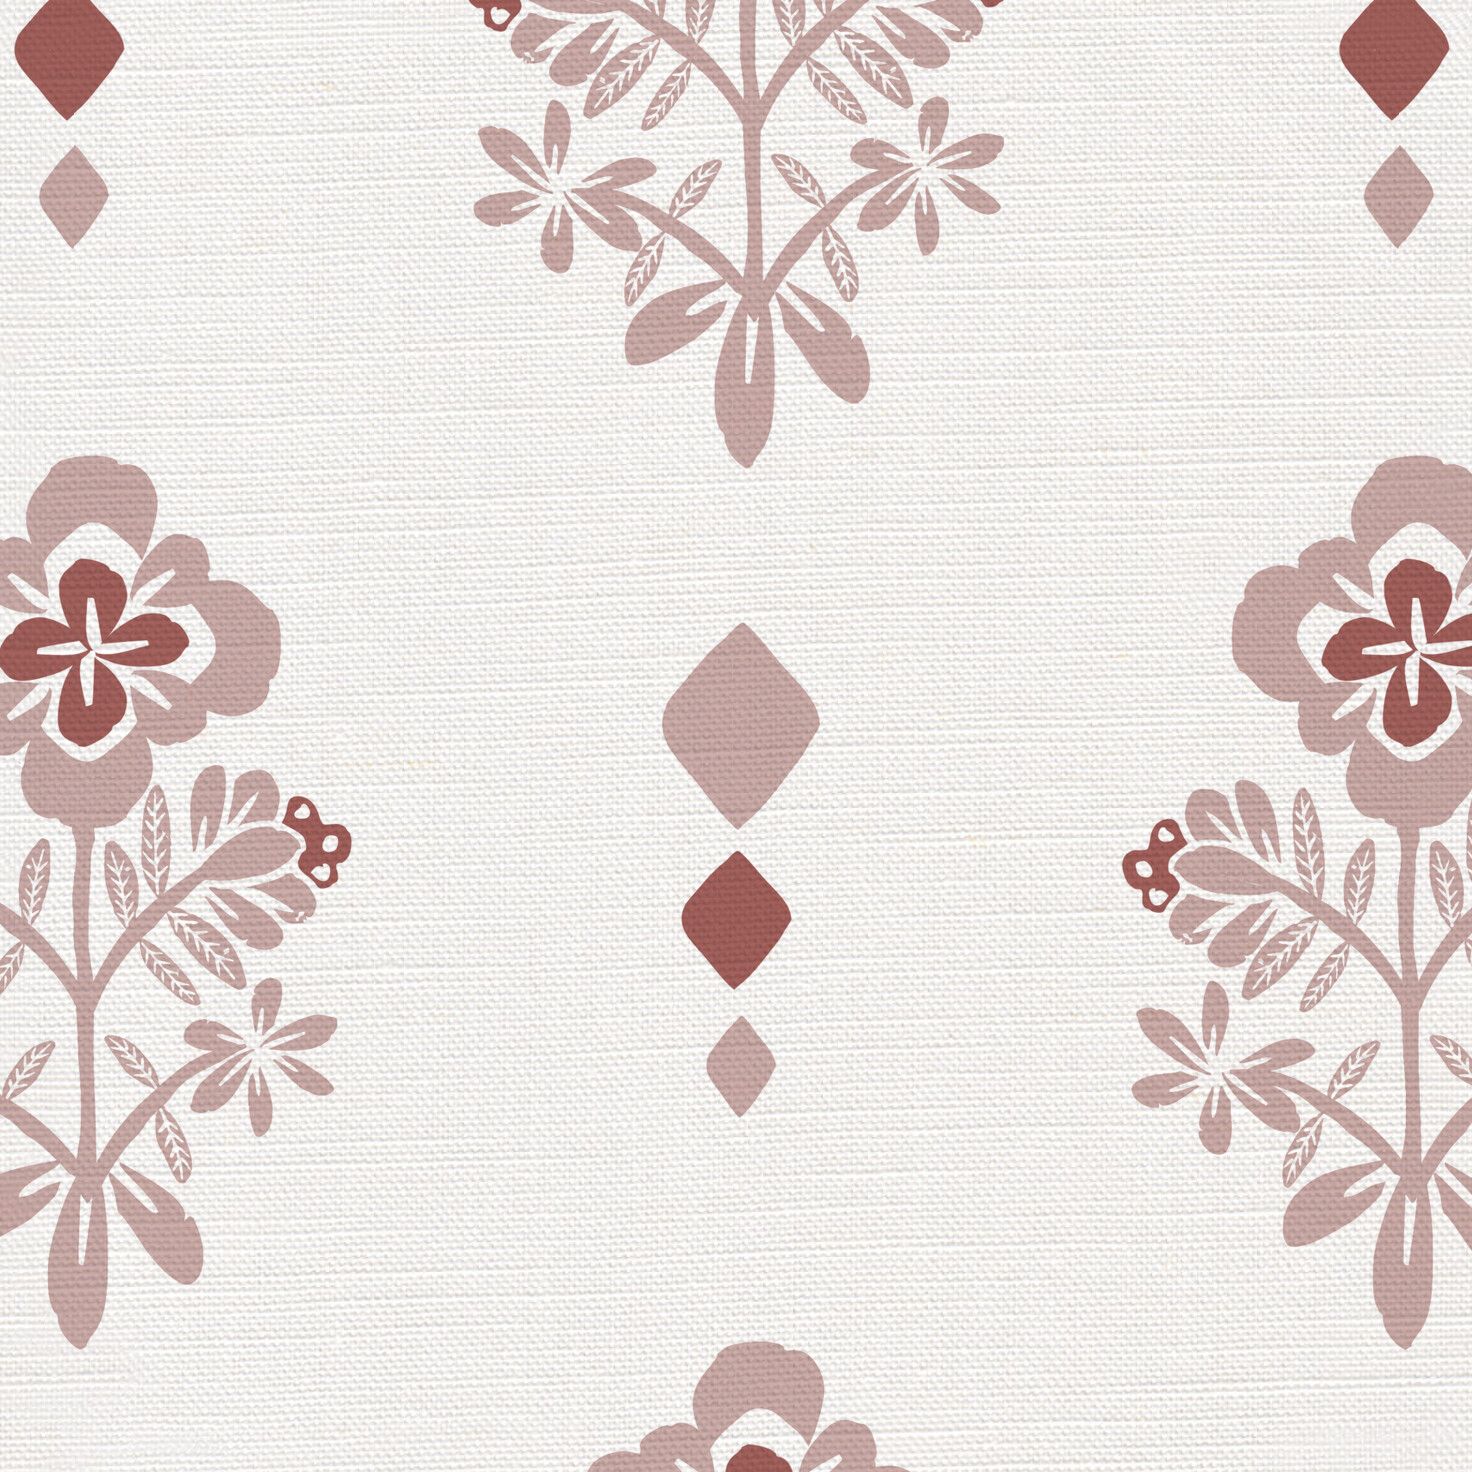 Floret Fabric in Pink on a White Background